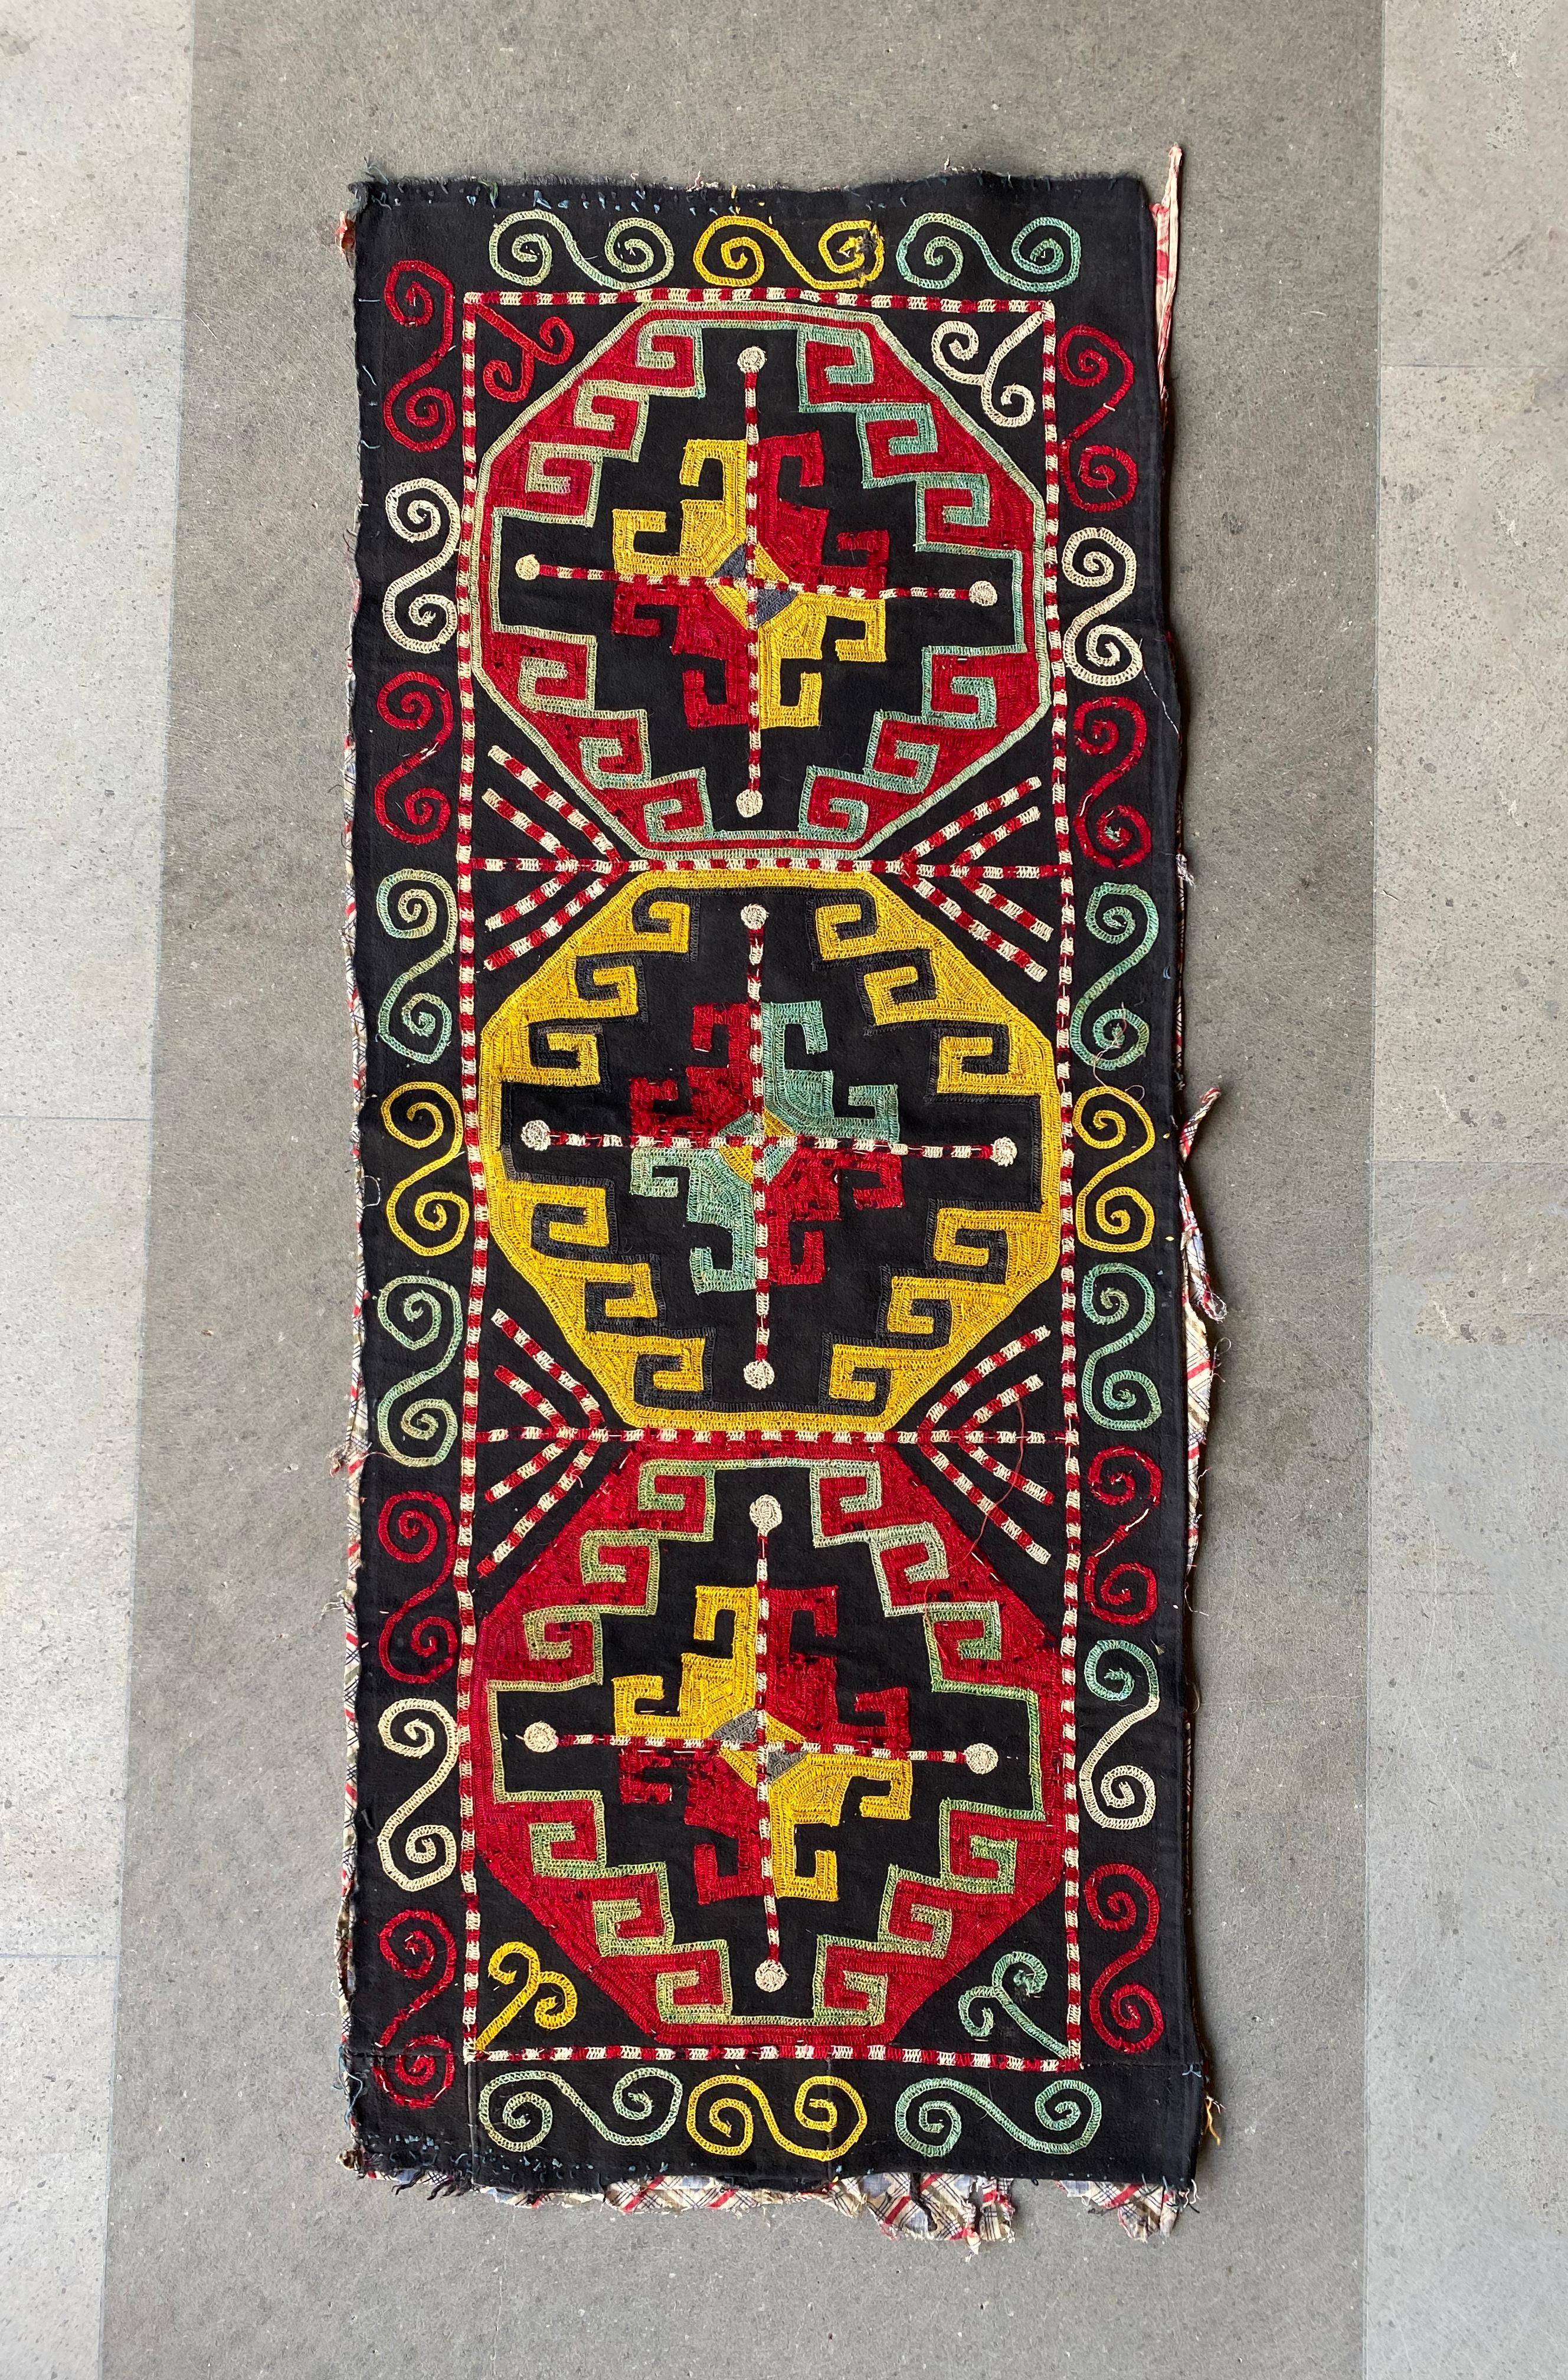 This textile is a “Suzani” from Central Asian nomadic peoples primarily from Kazakhstan, Tajikistan and Uzbekistan. Suzanis are embroidered textiles composed of mainly Cotton. They are cherished and admired for their elaborate designs, motifs and